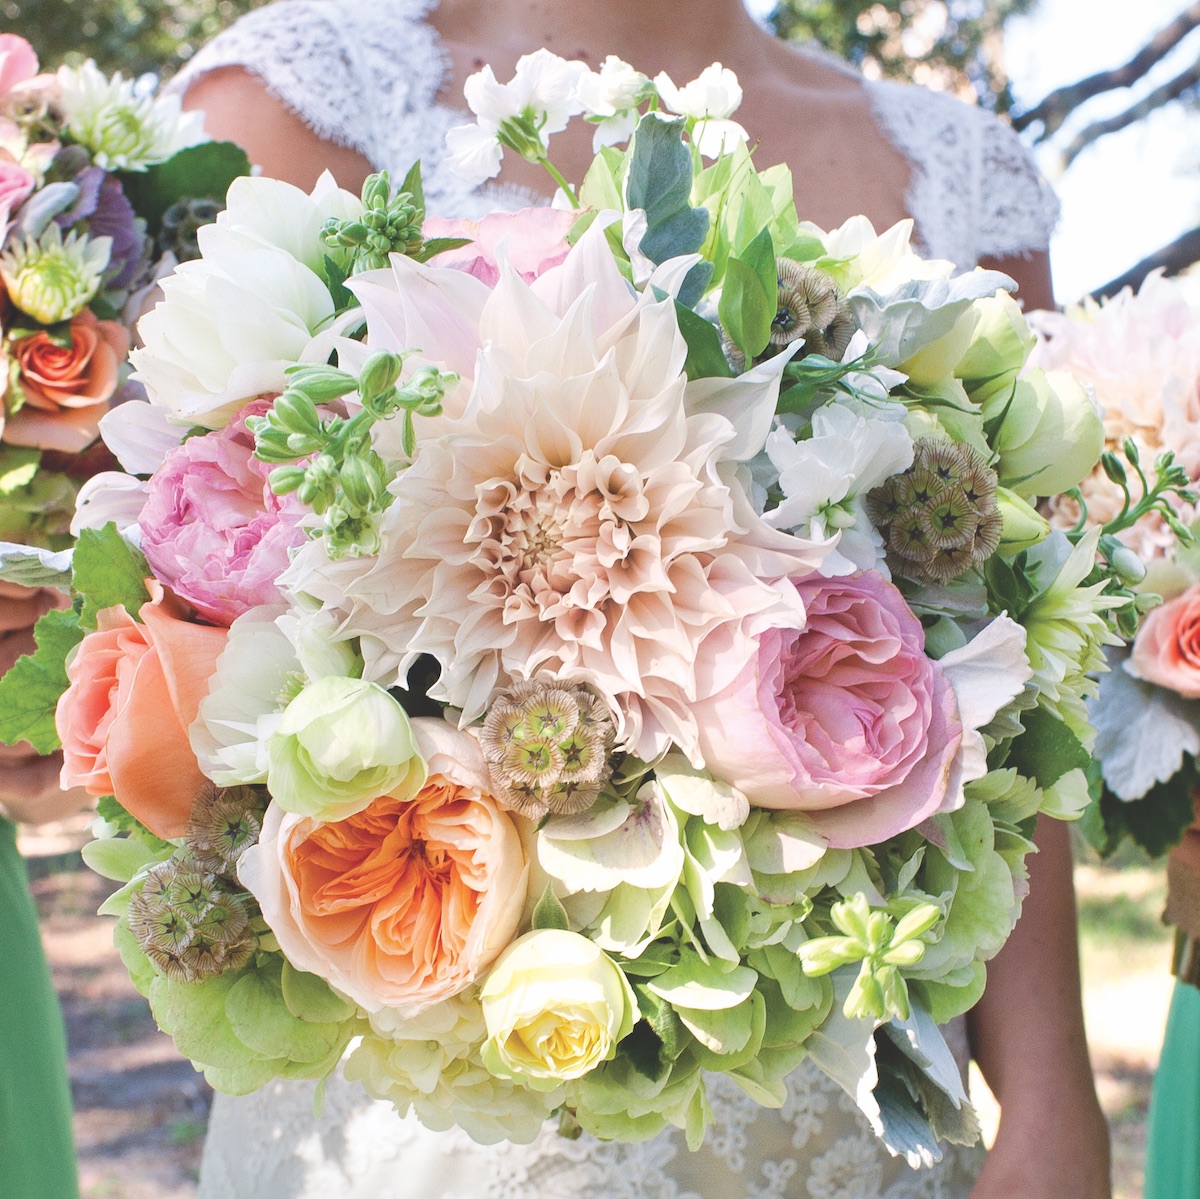 Wedding bouquet that served as inspiration for a Lulie Wallace floral painting